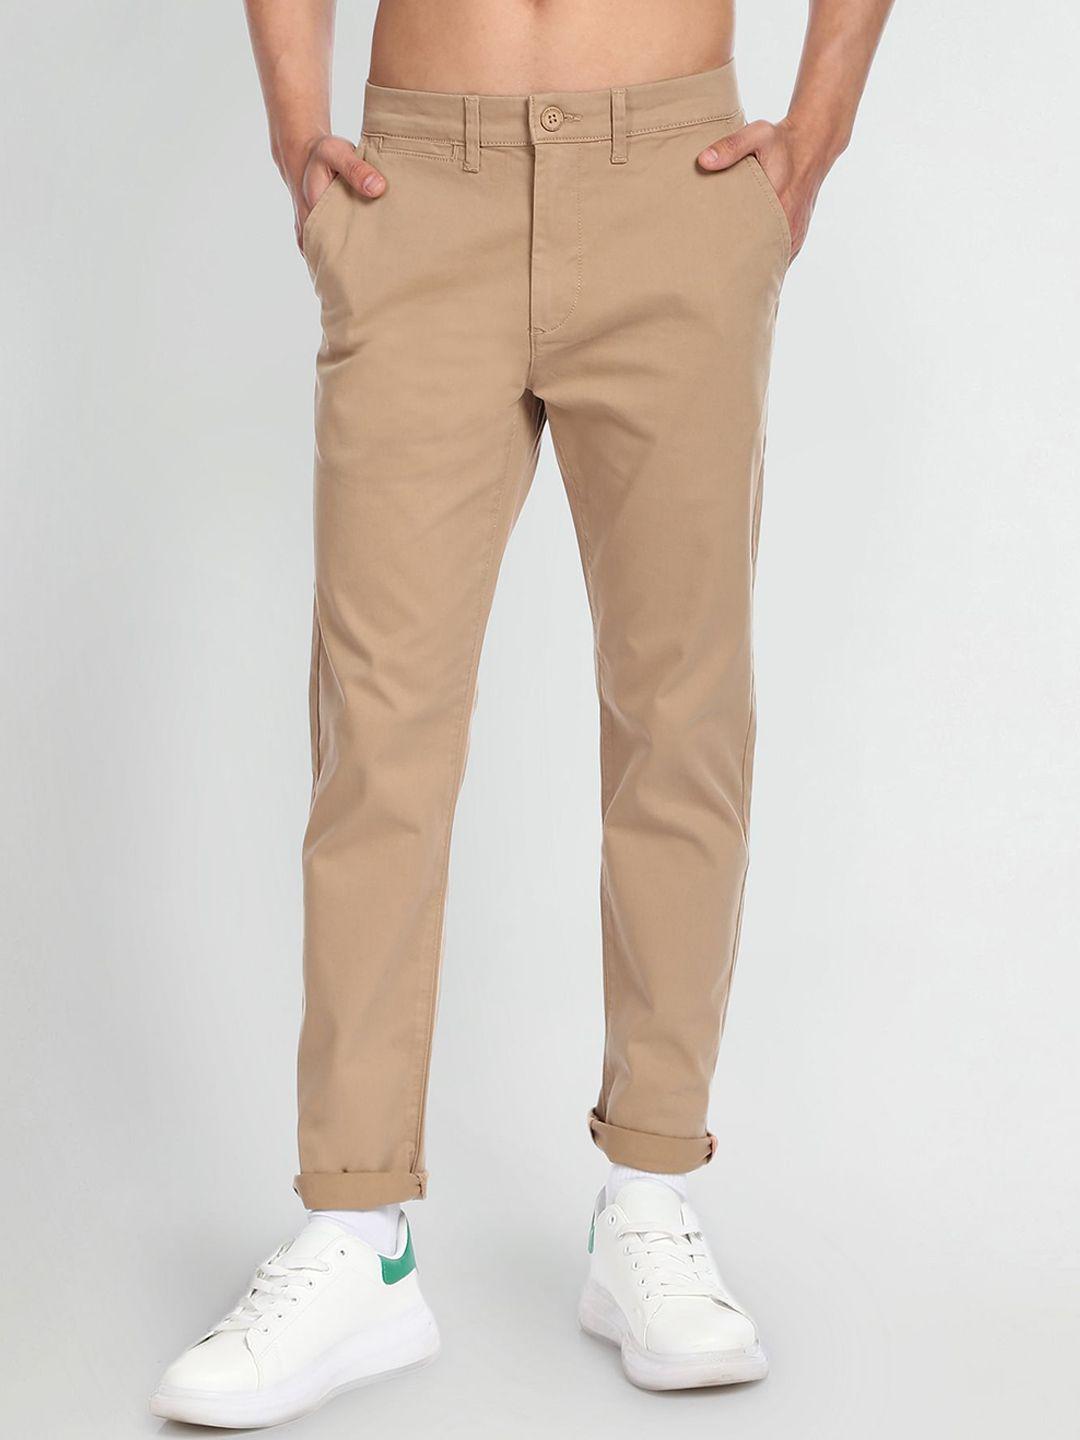 flying-machine-men-mid--rise-tapered-fit-casual-chinos